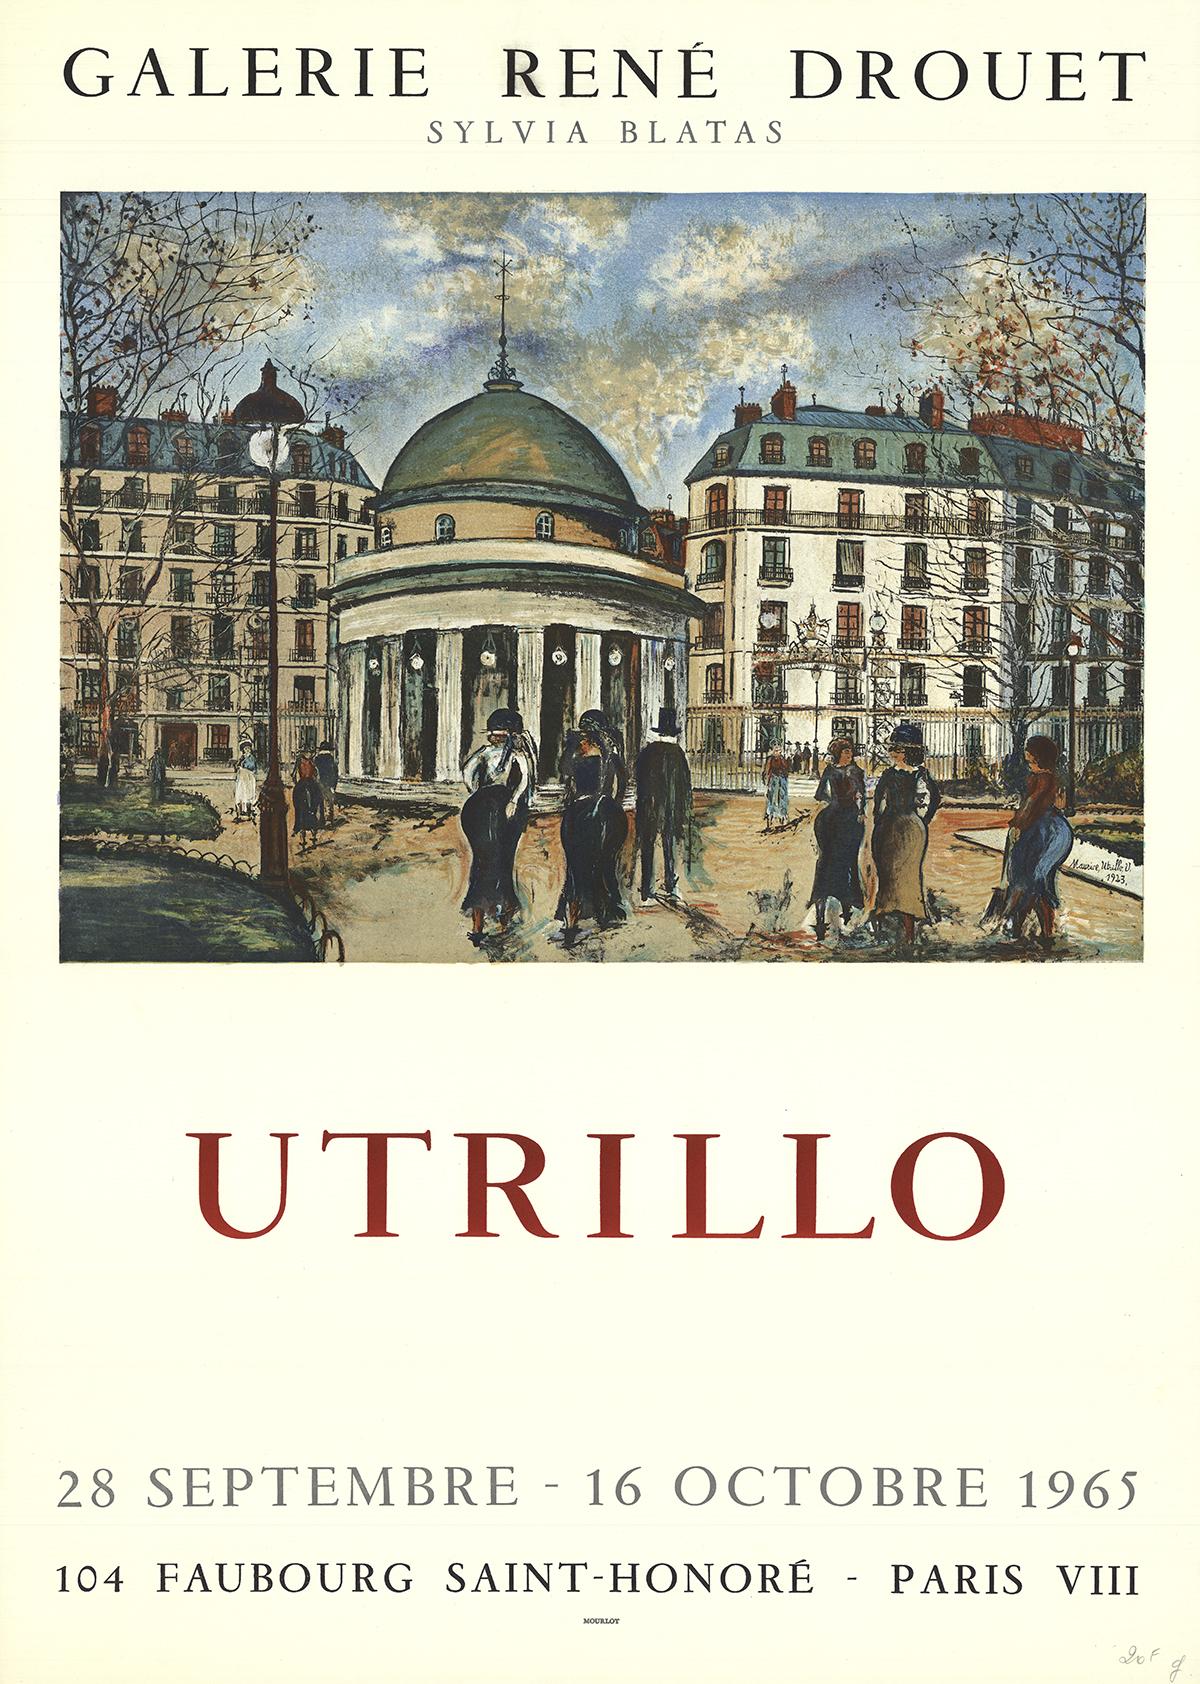 Poster for a Utrillo exhibition which was held at Galerie Rene Drouet from September - October 1965.
